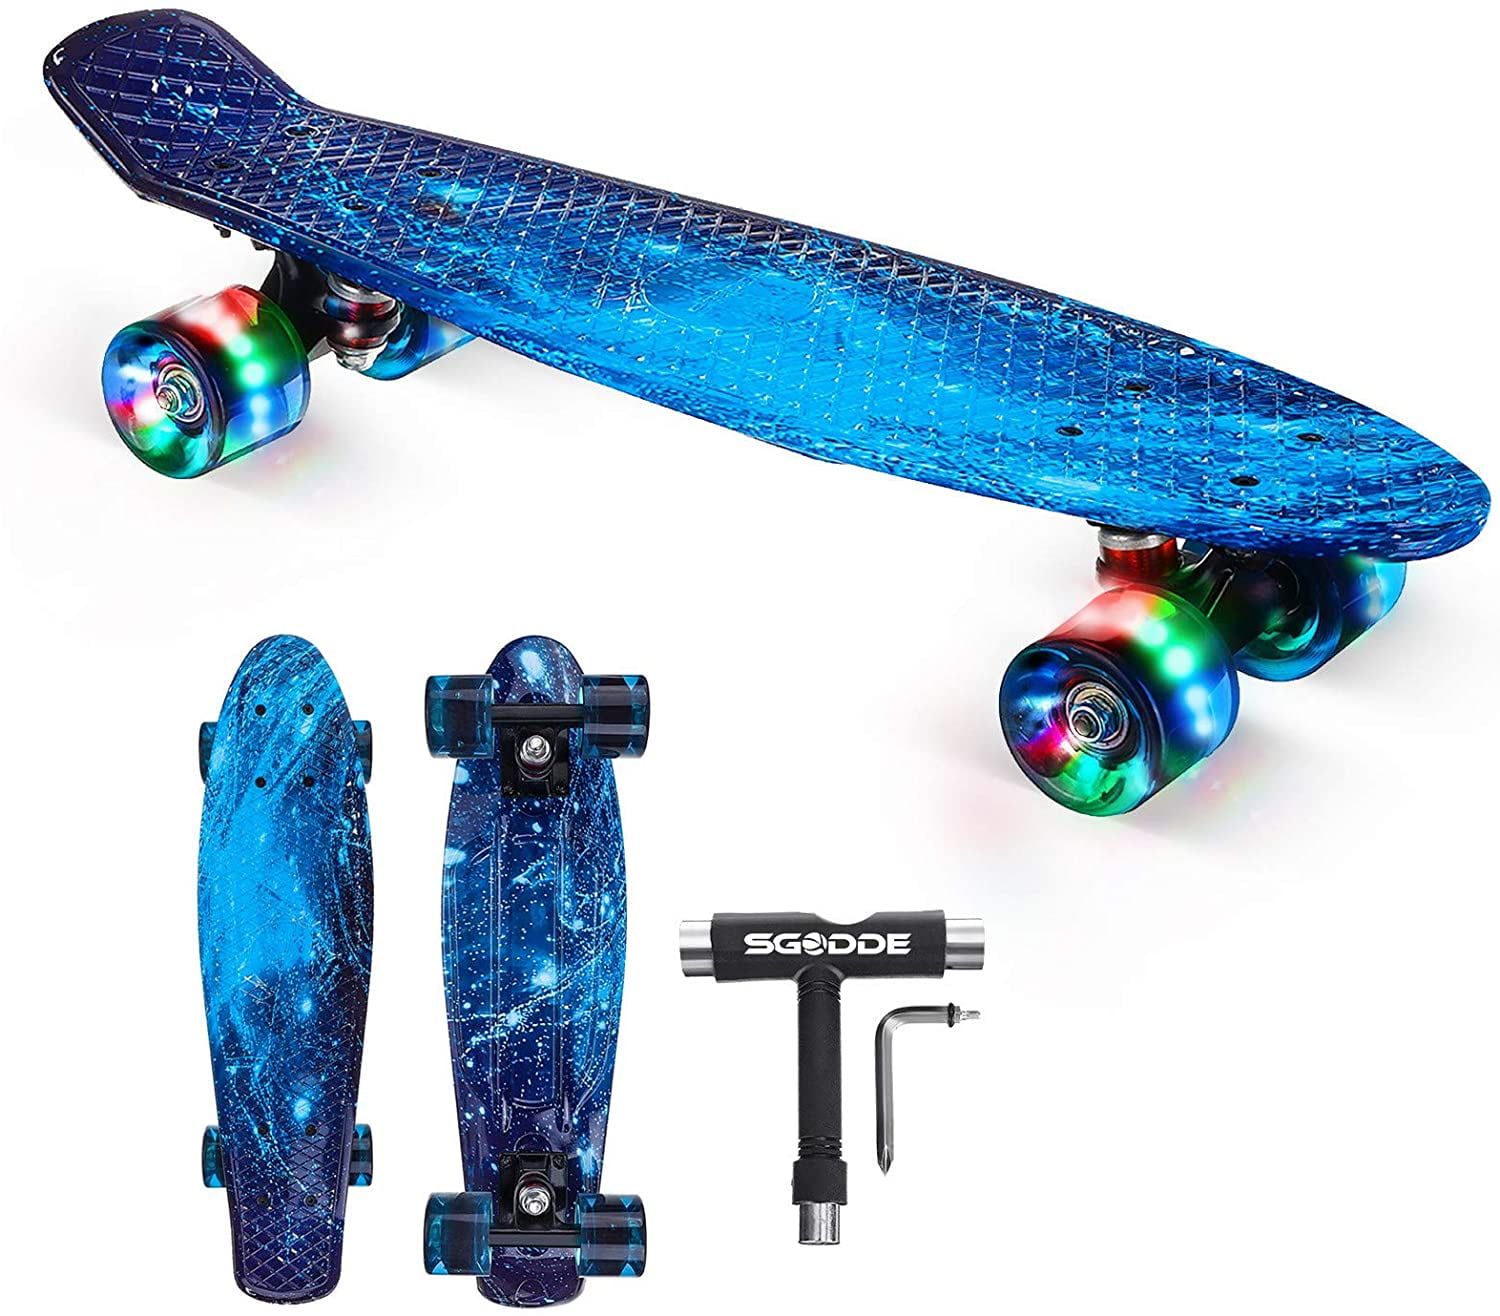 Skateboard Complete 22 inch Mini Cruiser Skateboard for Kids Teens Adults with Sturdy Deck,LED Light up Wheels with All-in-One Skate T-Tool for Beginners 